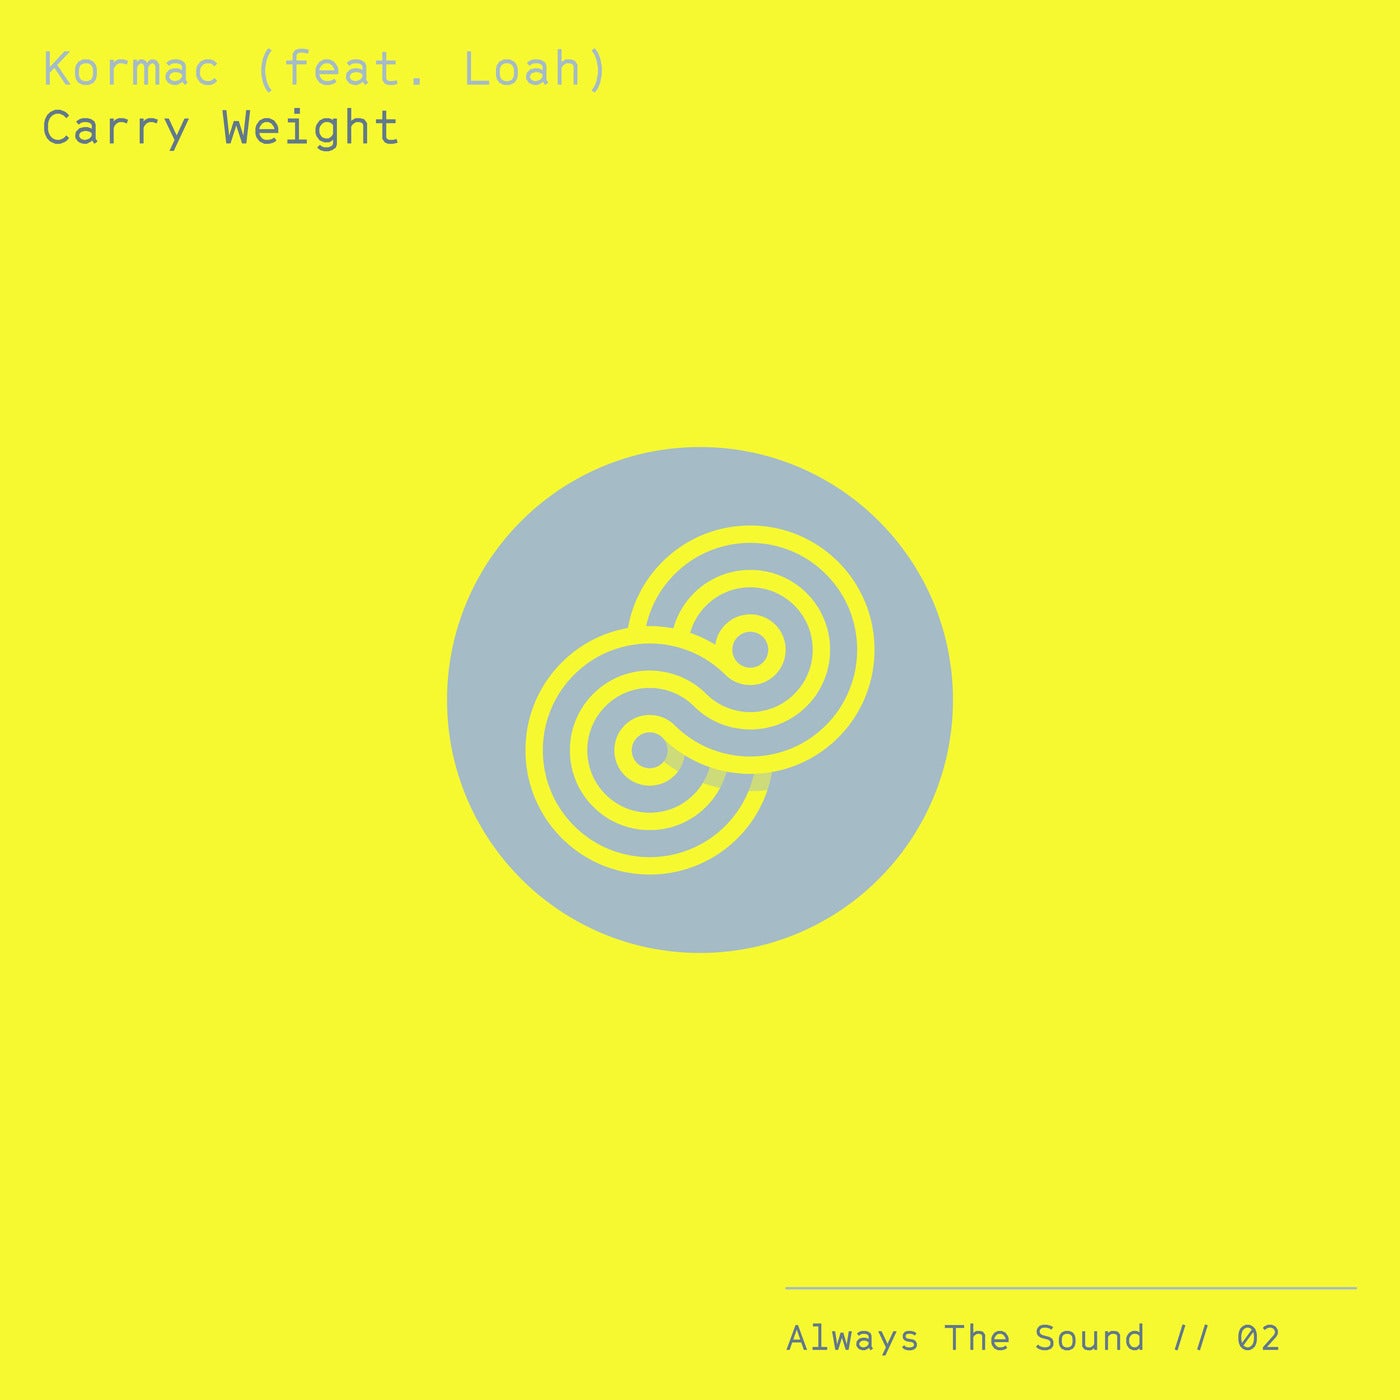 Carry Weight